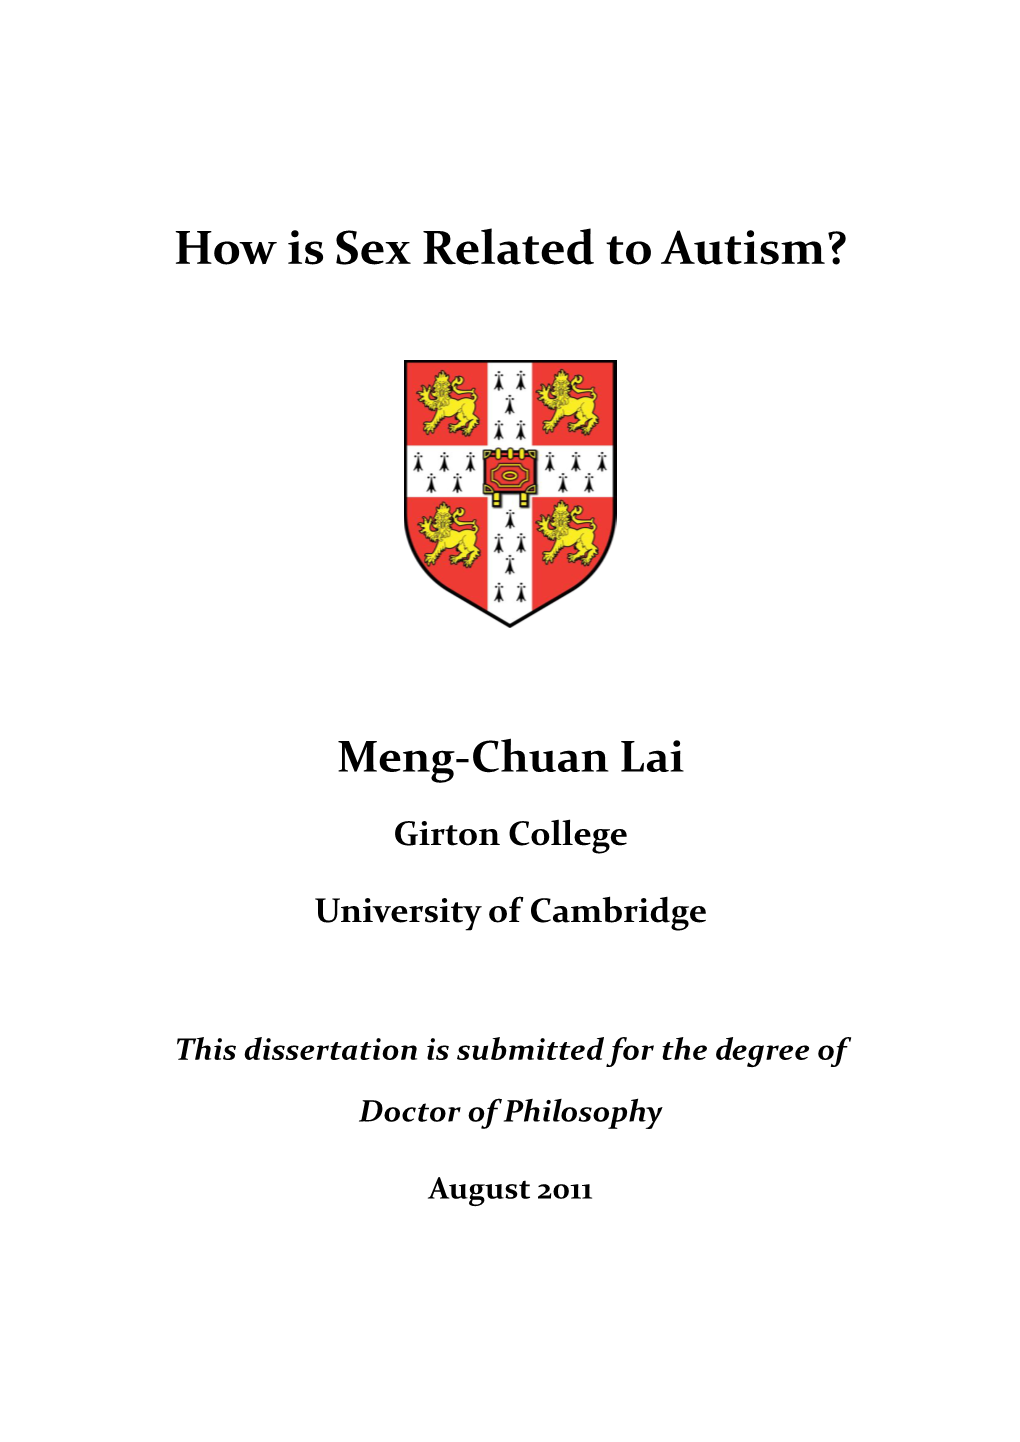 How Is Sex Related to Autism?